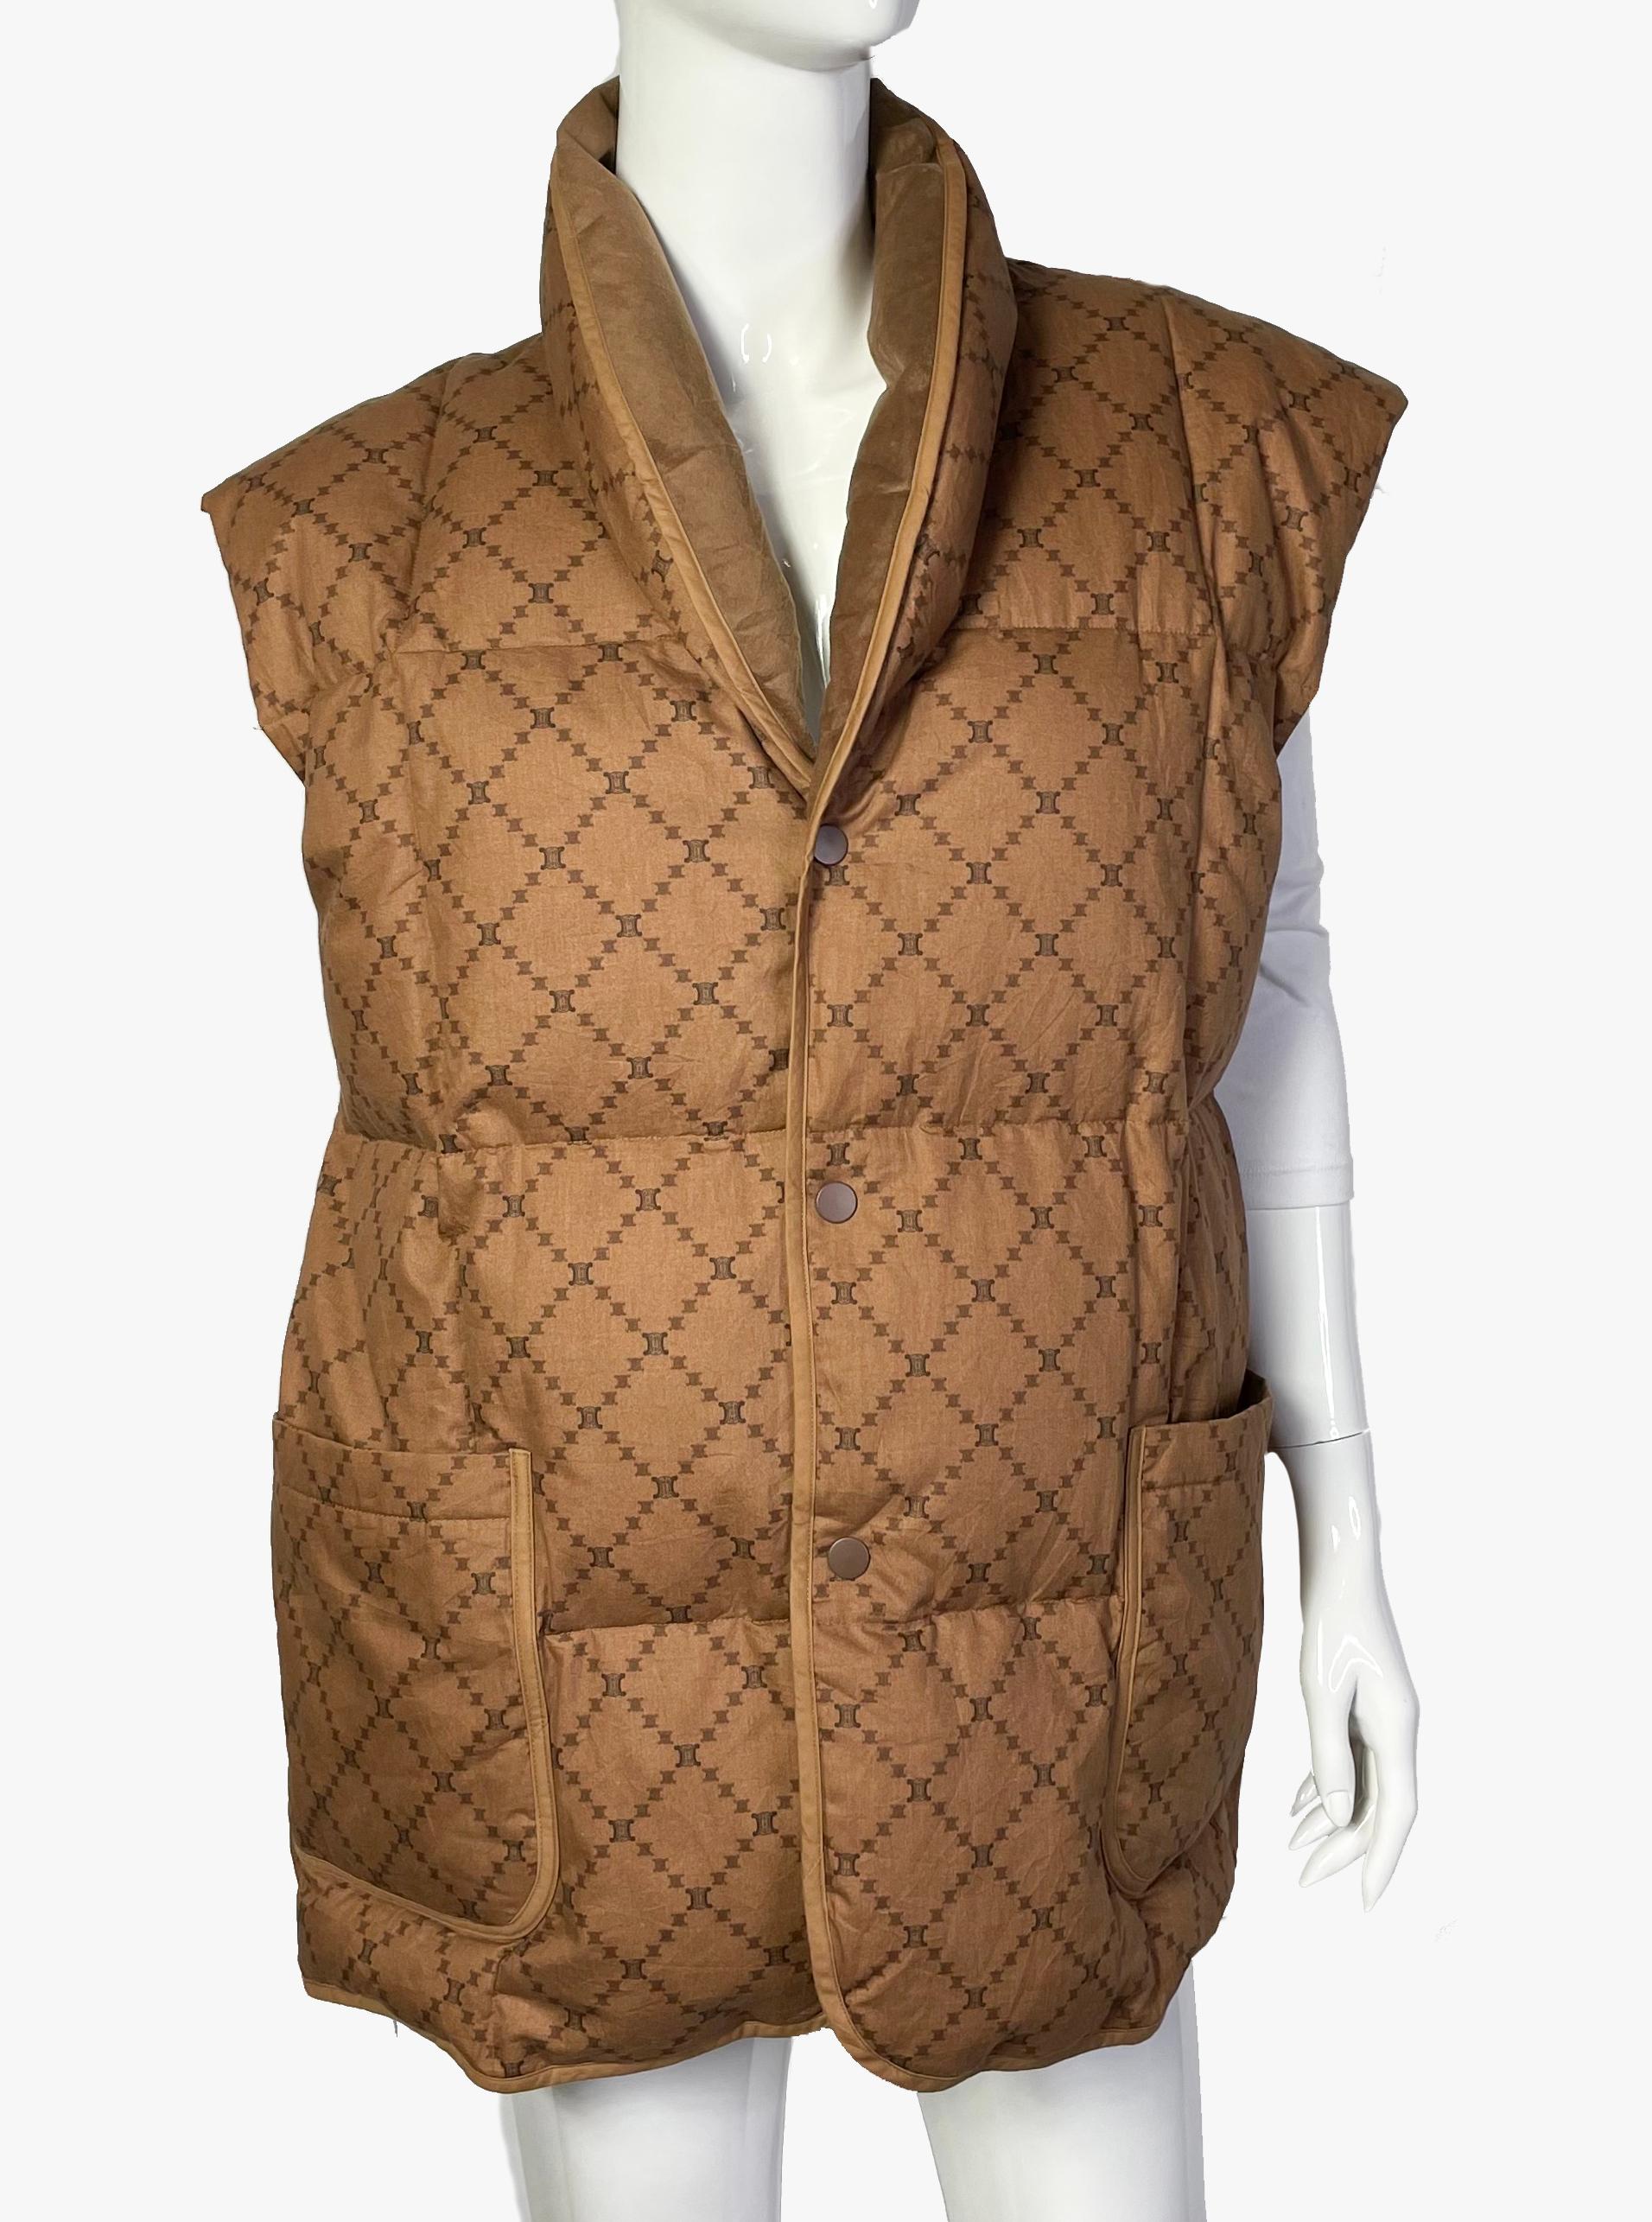 Vintage Celine vest from the 1990's Michael Kors collection. 
Brown color, stand-up collar, patch pockets and snap closure. 
Period: 1990s
Bust: 46